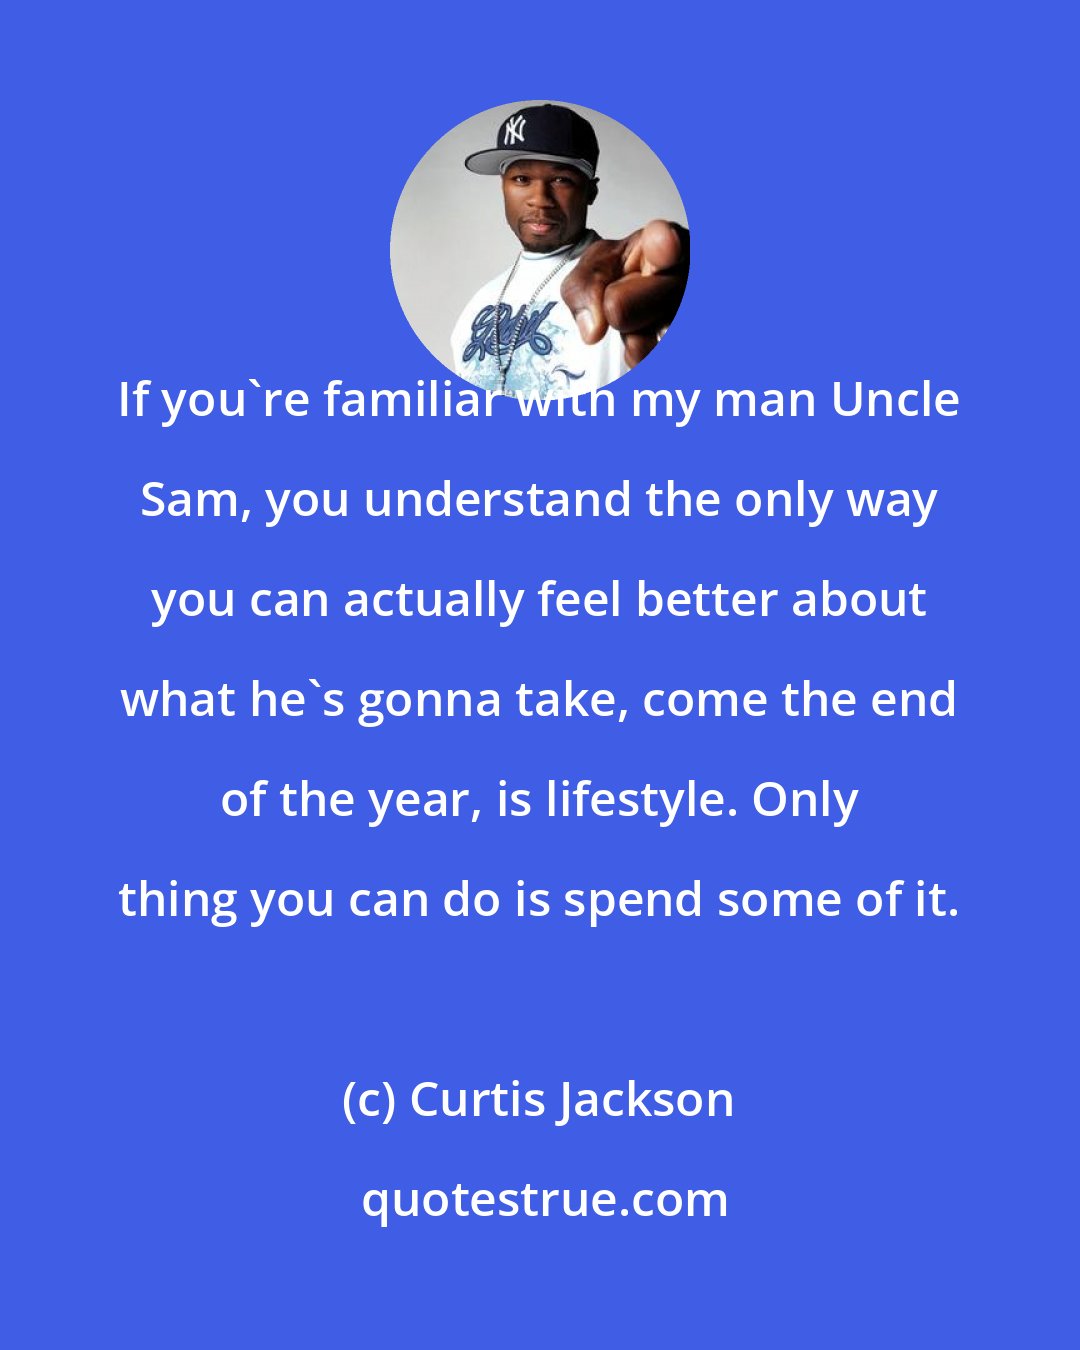 Curtis Jackson: If you're familiar with my man Uncle Sam, you understand the only way you can actually feel better about what he's gonna take, come the end of the year, is lifestyle. Only thing you can do is spend some of it.